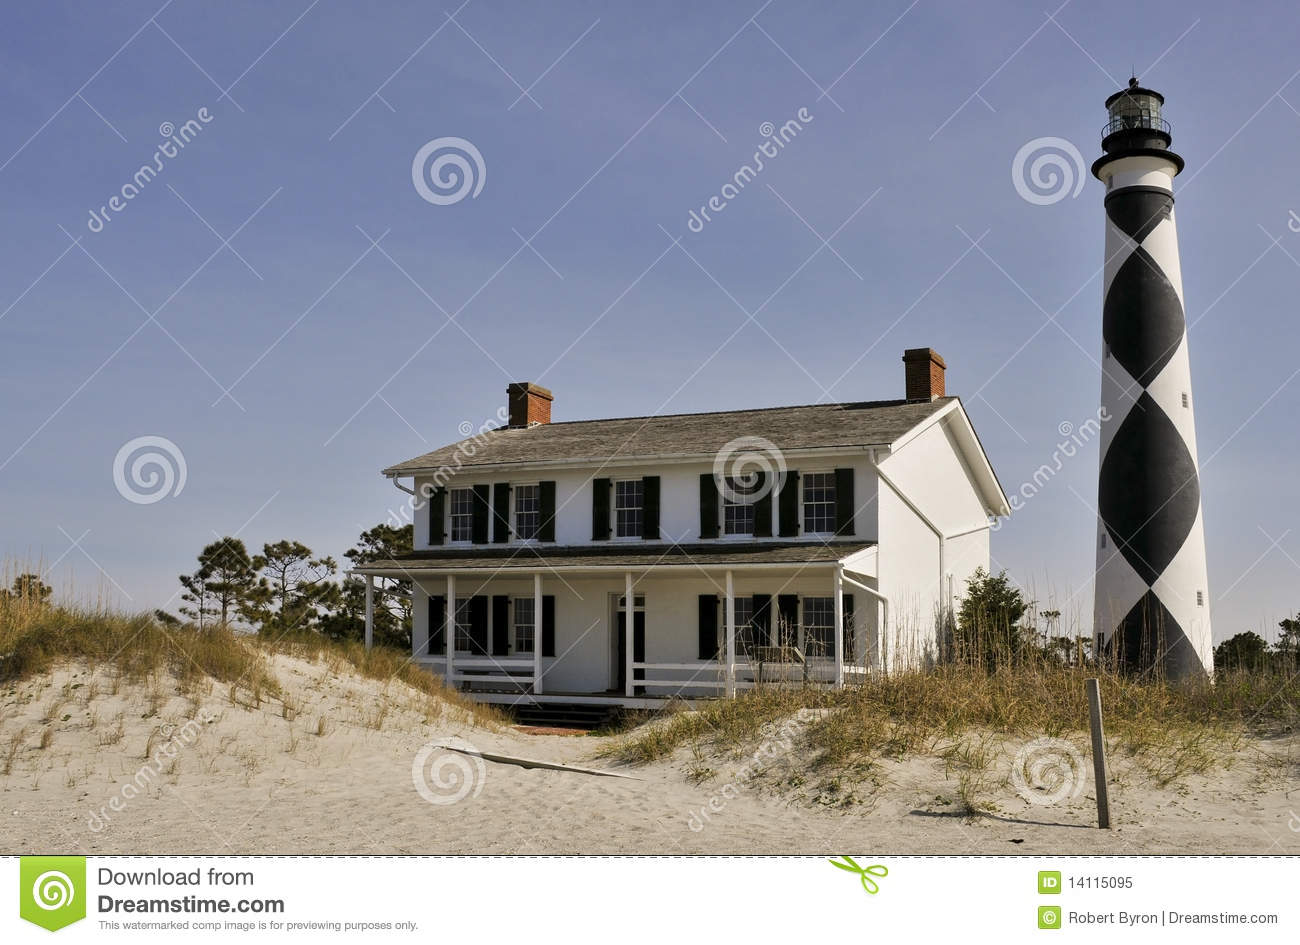 Cape Lookout Lighthouse Royalty Free Stock Photo   Image  14115095